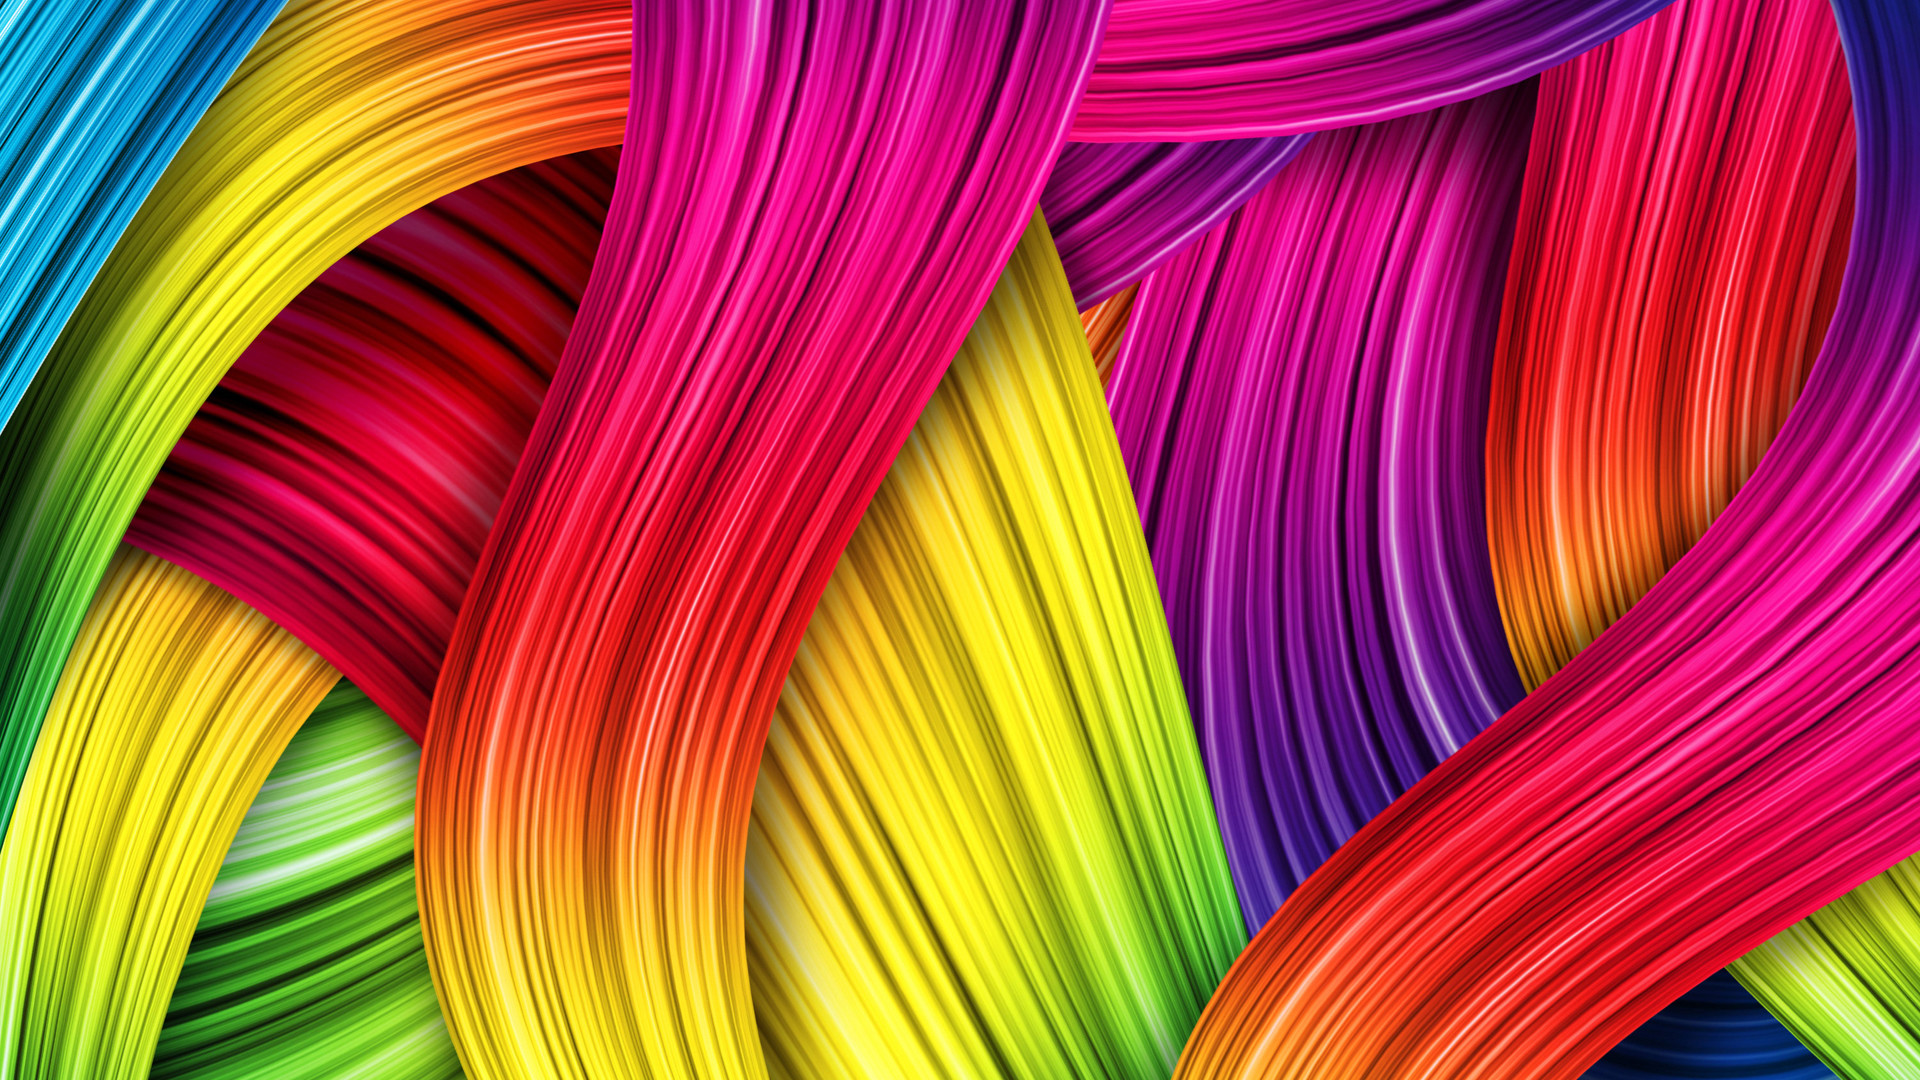 1920x1080 Animated Colorful Thread Wallpaper With Resolutions 1920Ã1080 Pixel